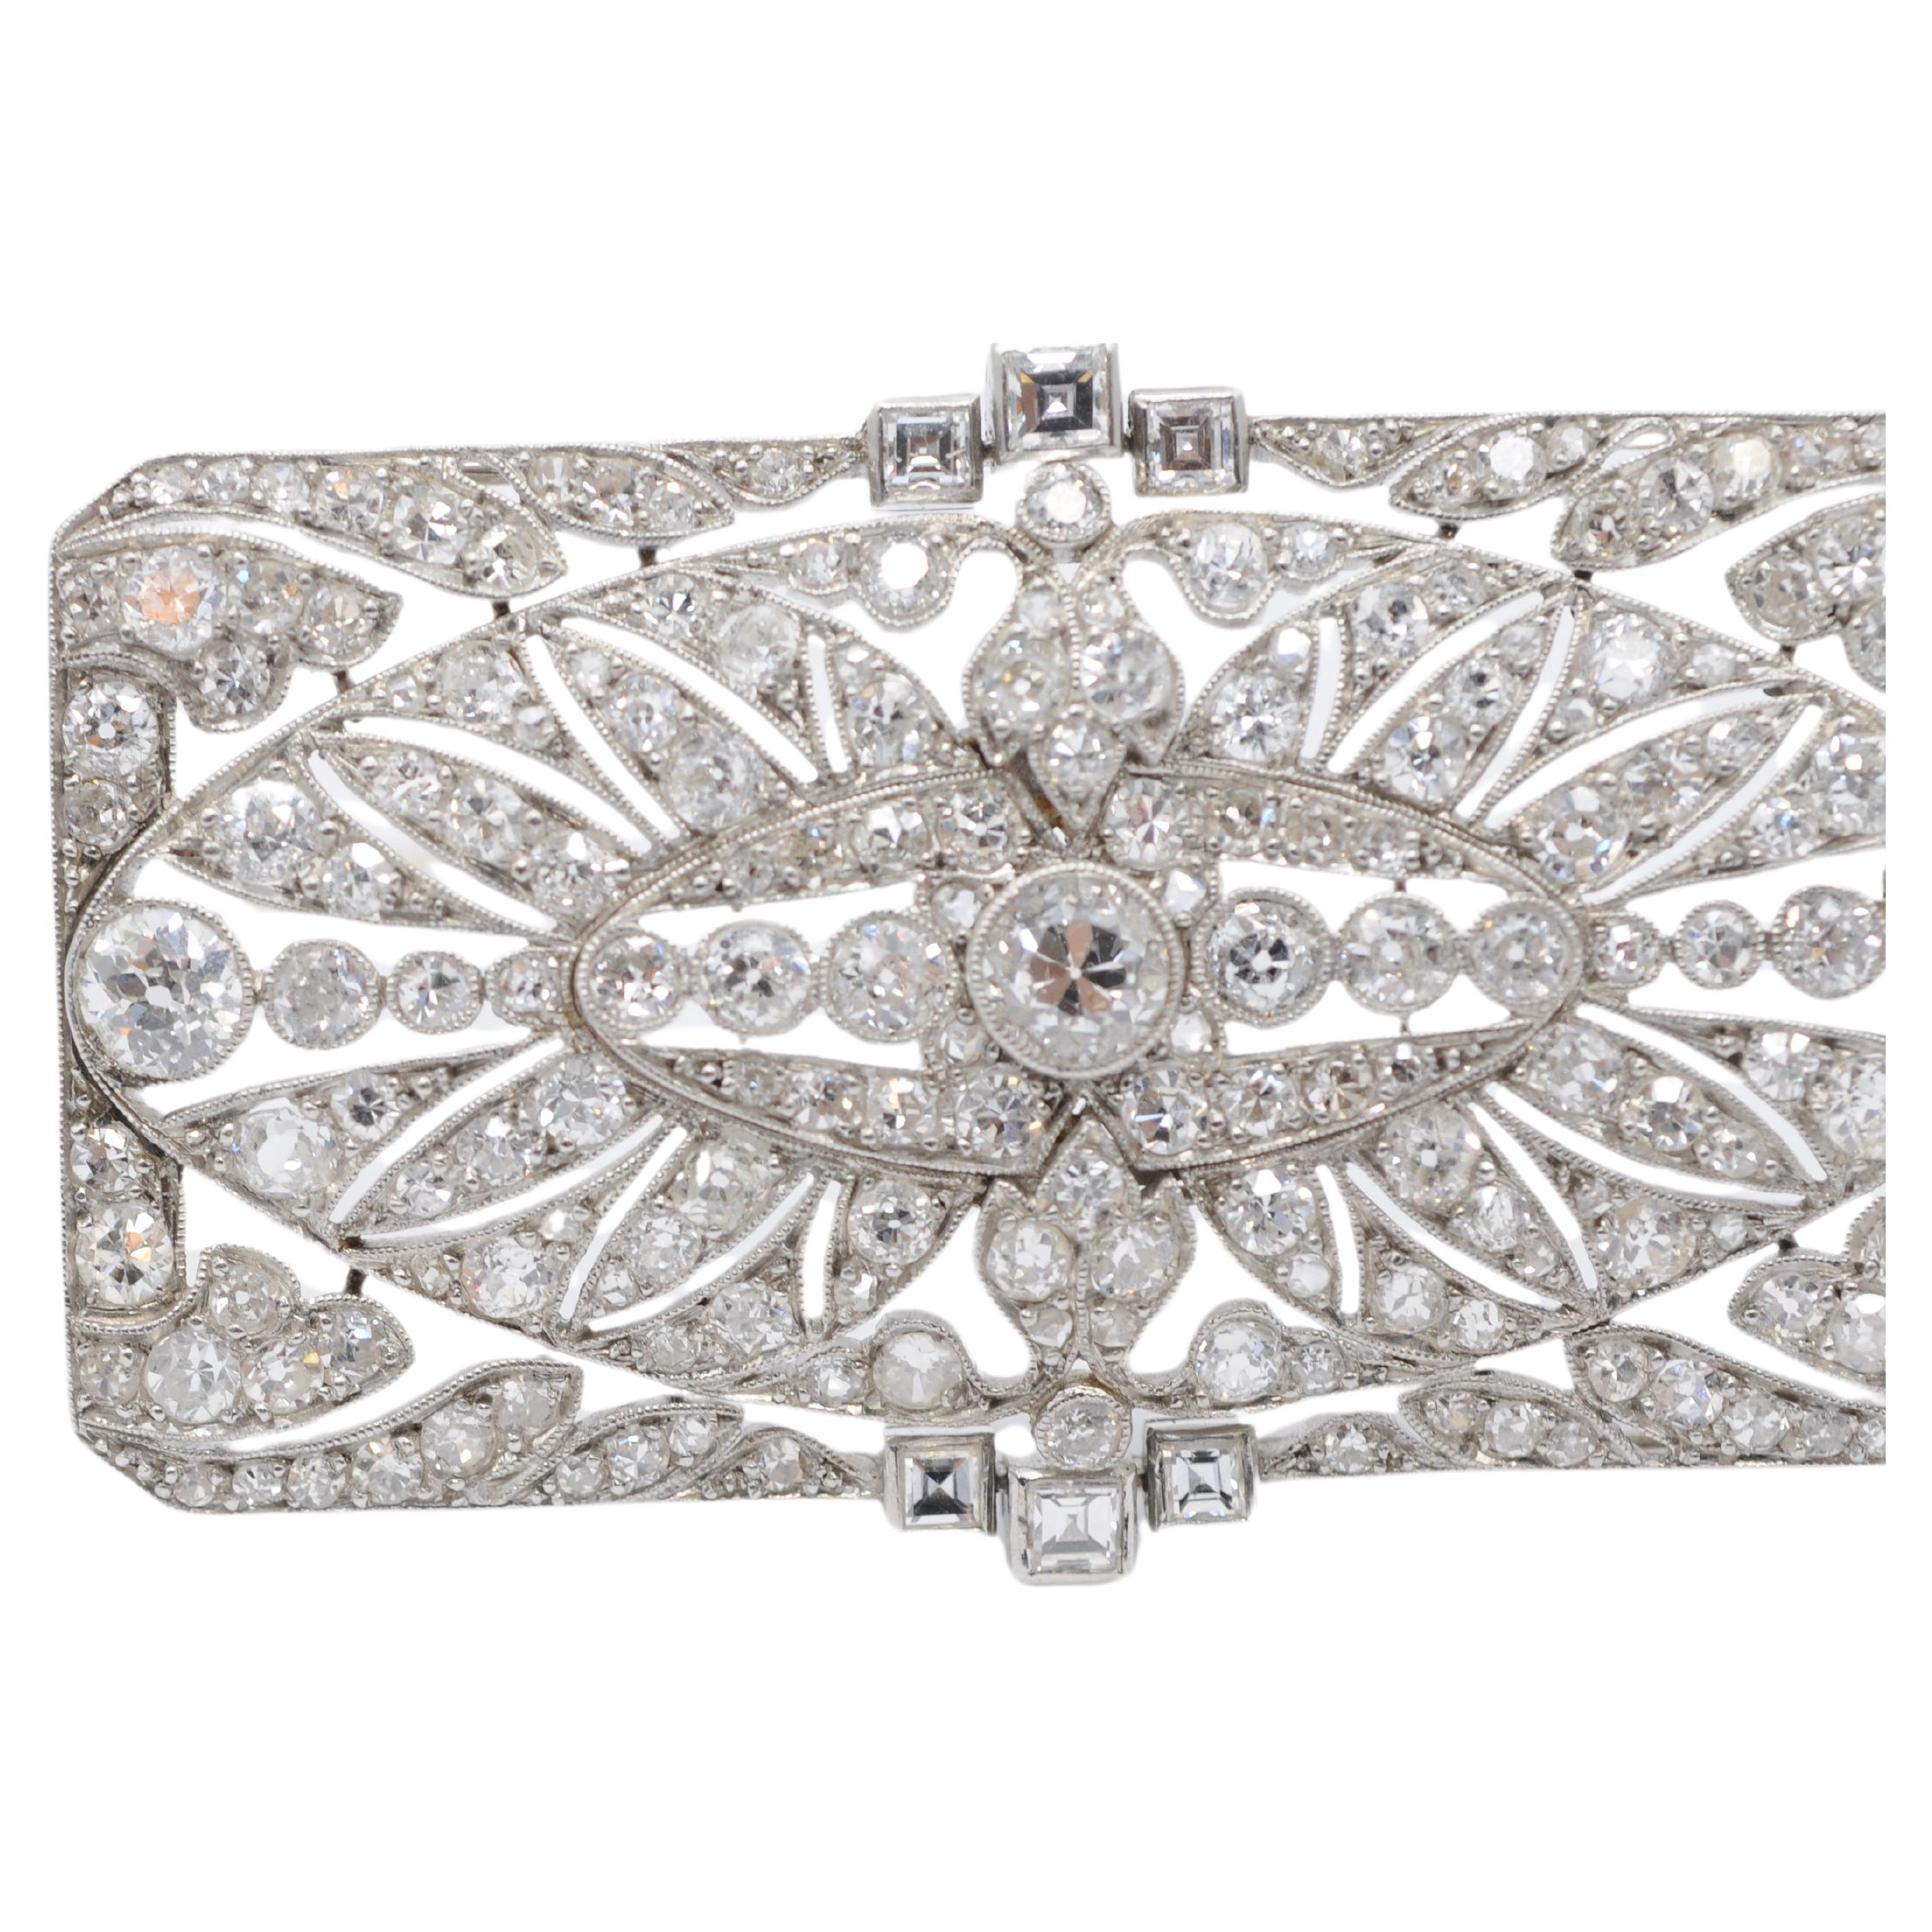 Art deco brooch with 170 diamonds in Old European cut noble platinum  For Sale 5